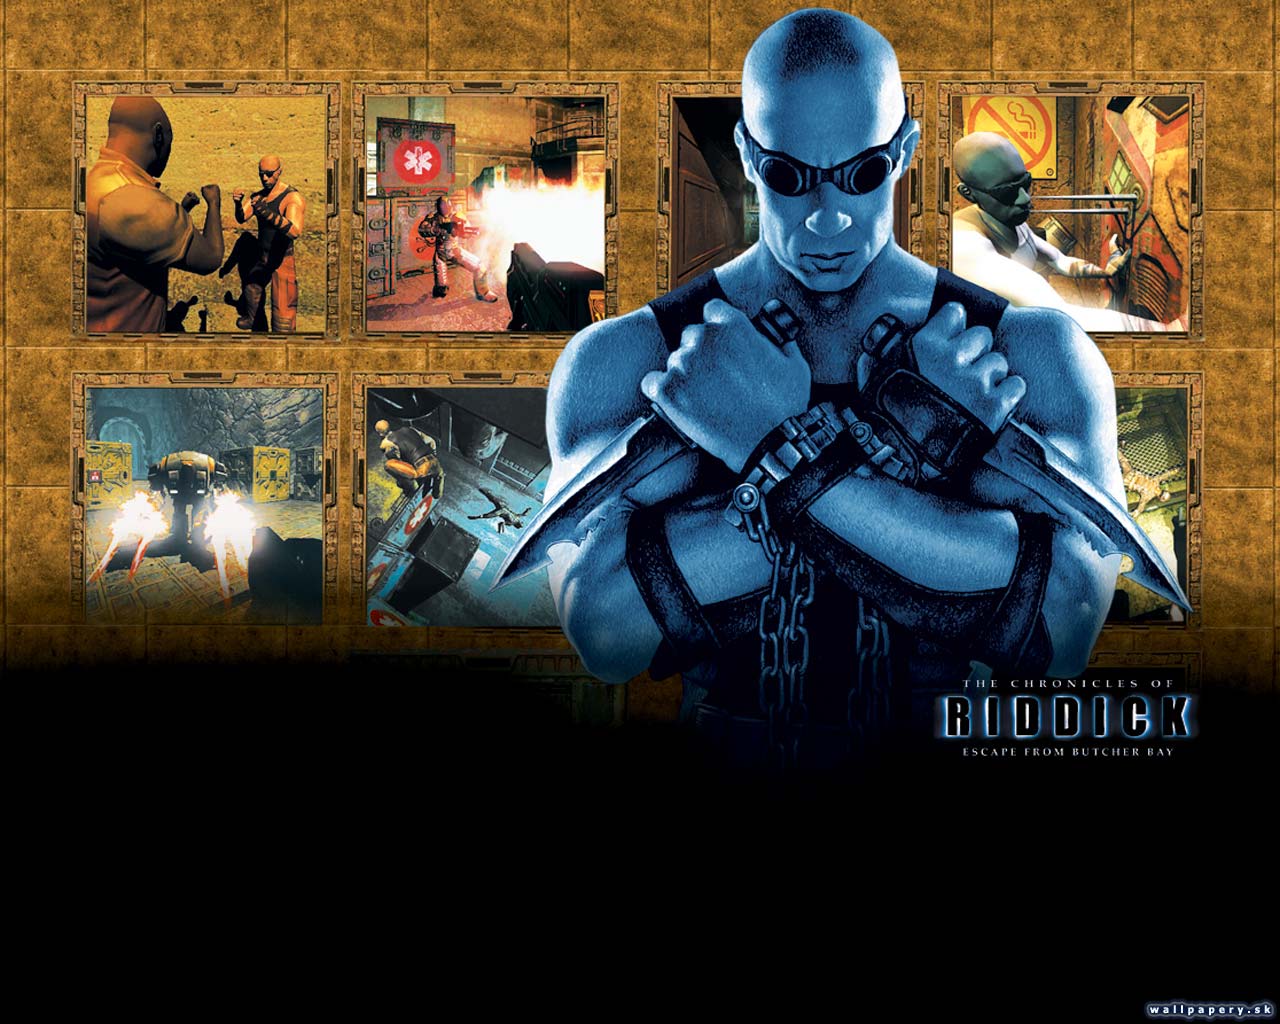 The Chronicles of Riddick: Escape From Butcher Bay - wallpaper 6